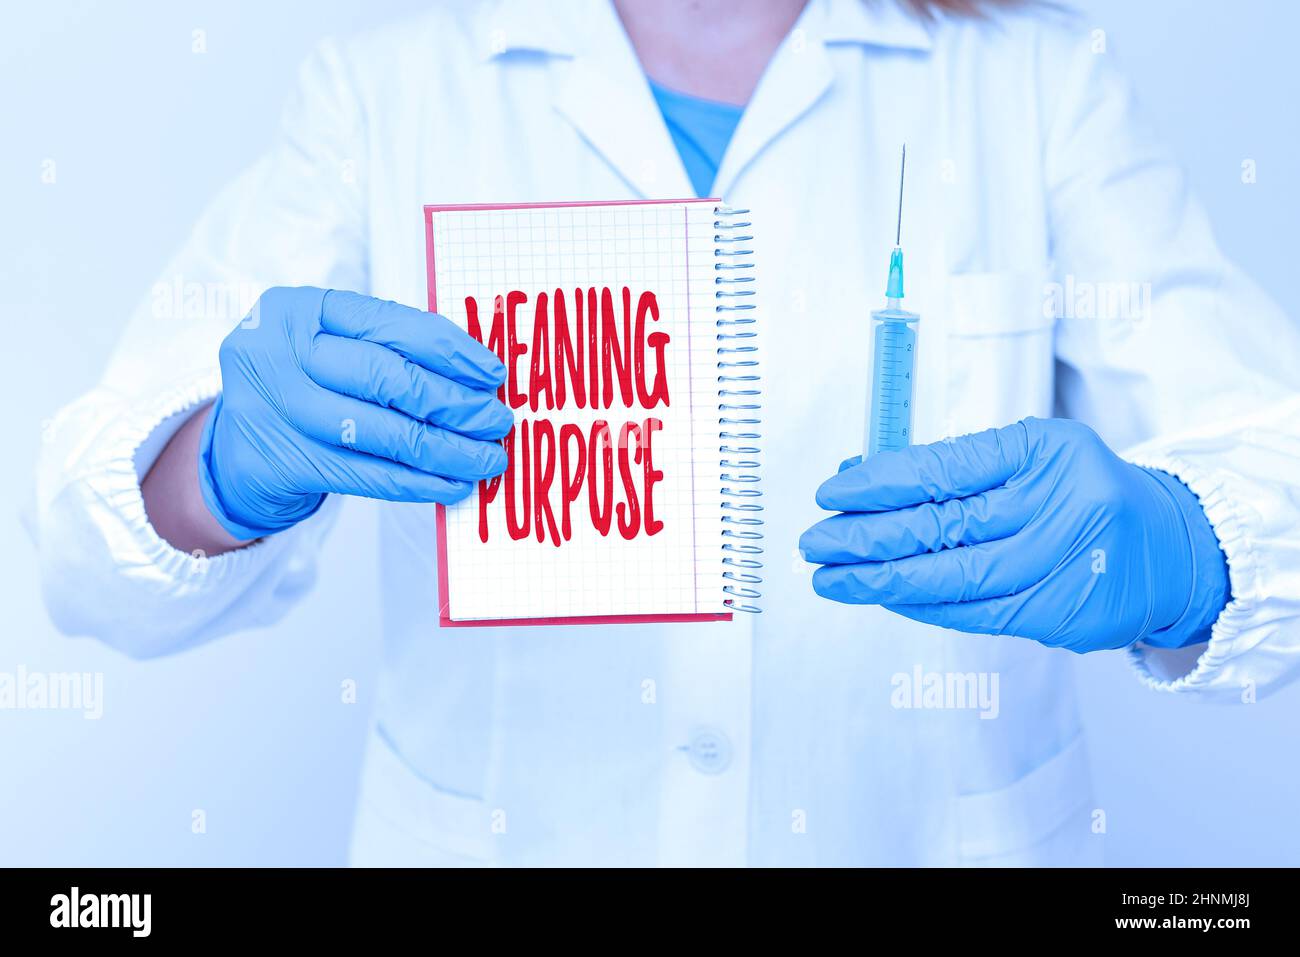 Text showing inspiration Meaning Purpose, Business concept The reason for which something is done or created and exists Preparing Medical Vaccine Pres Stock Photo